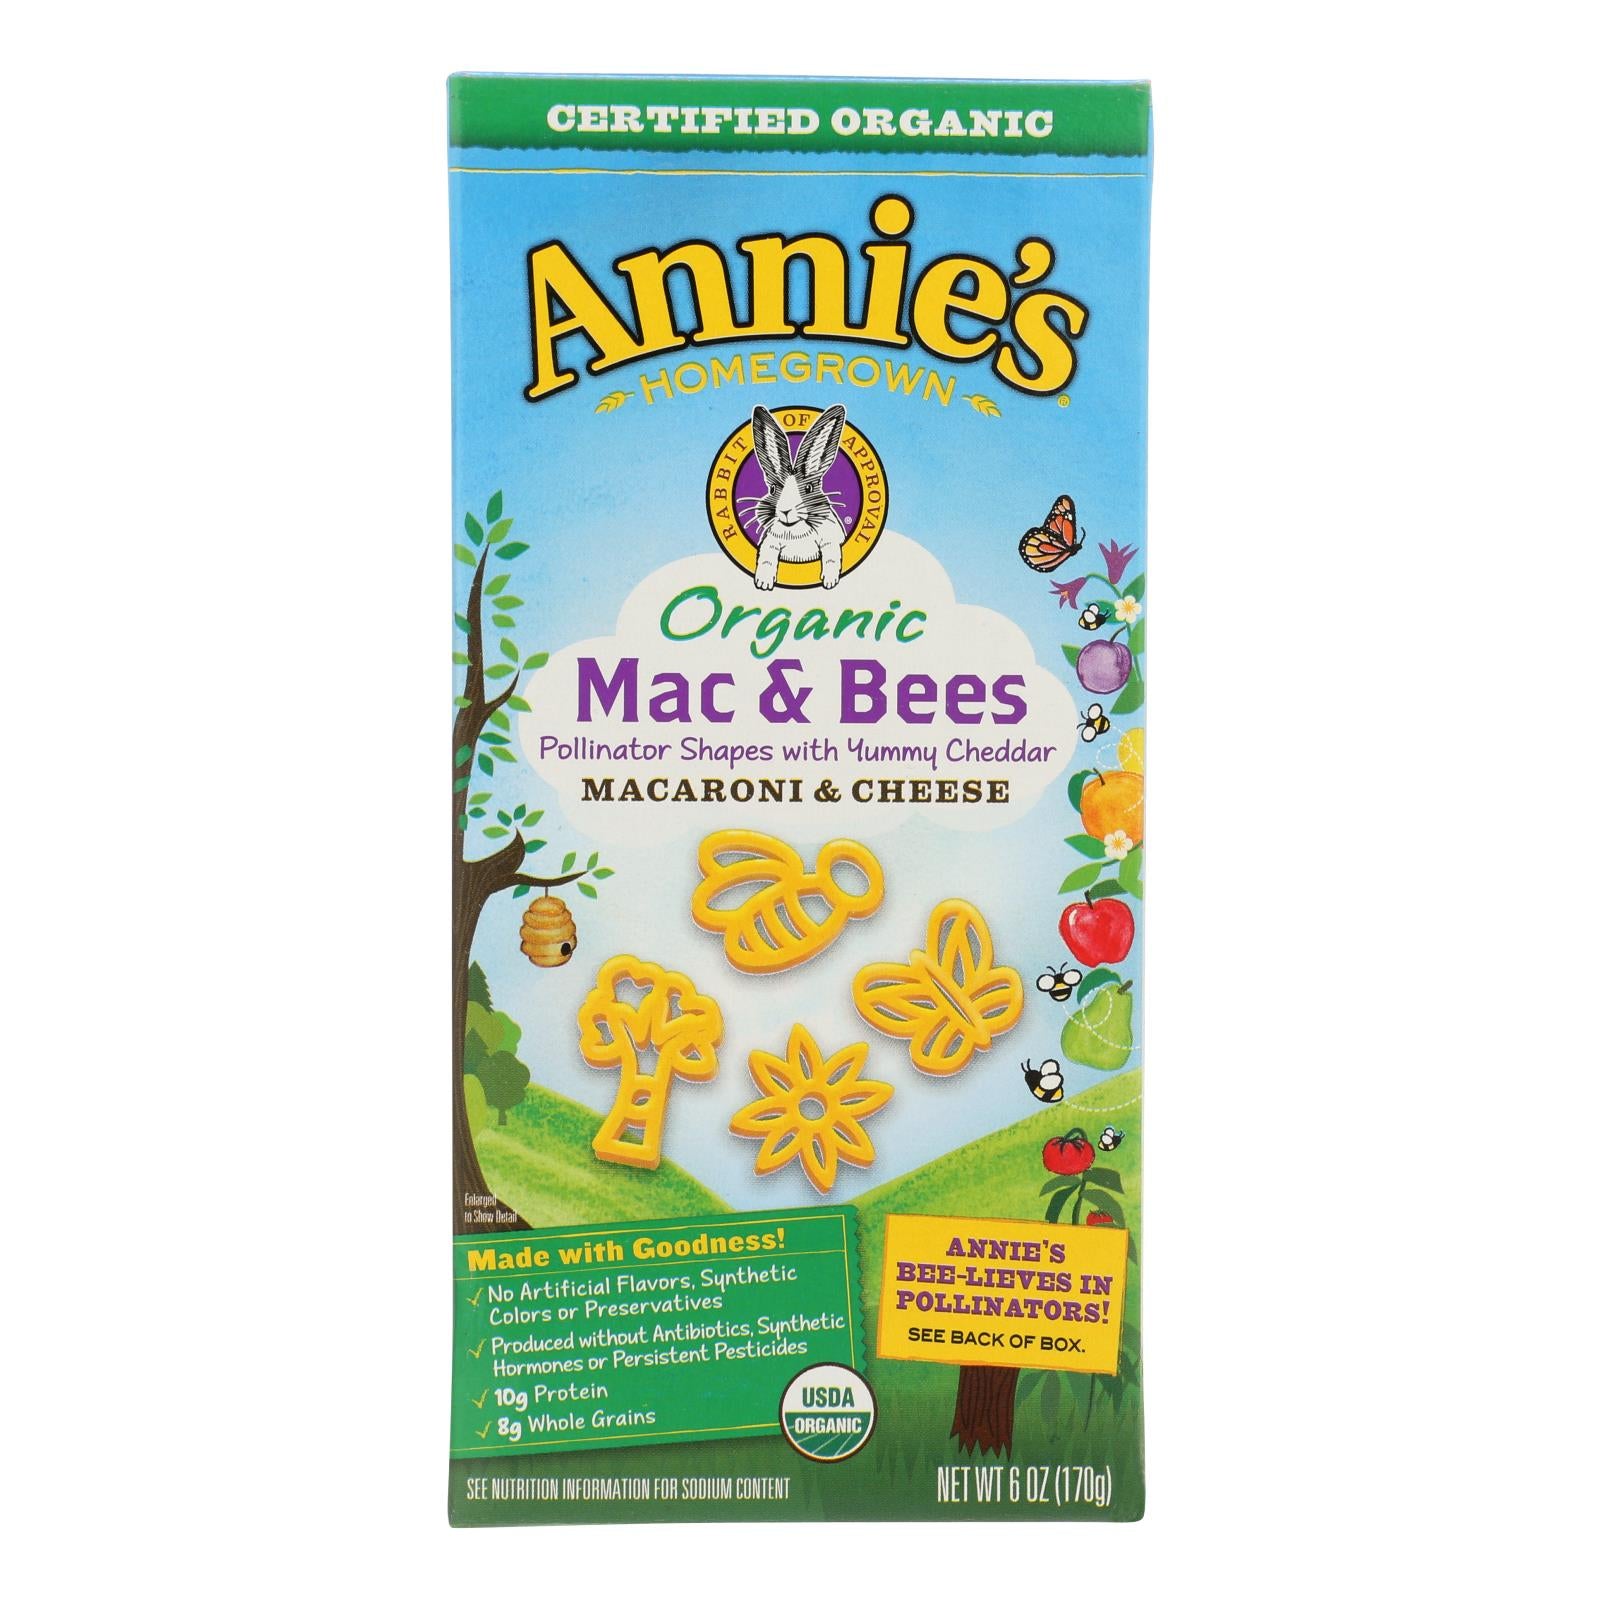 Annie'S Homegrown, Annie's Homegrown Organic Mac and Bees Macaroni and Cheese - Case of 12 - 6 oz. (Pack of 12)